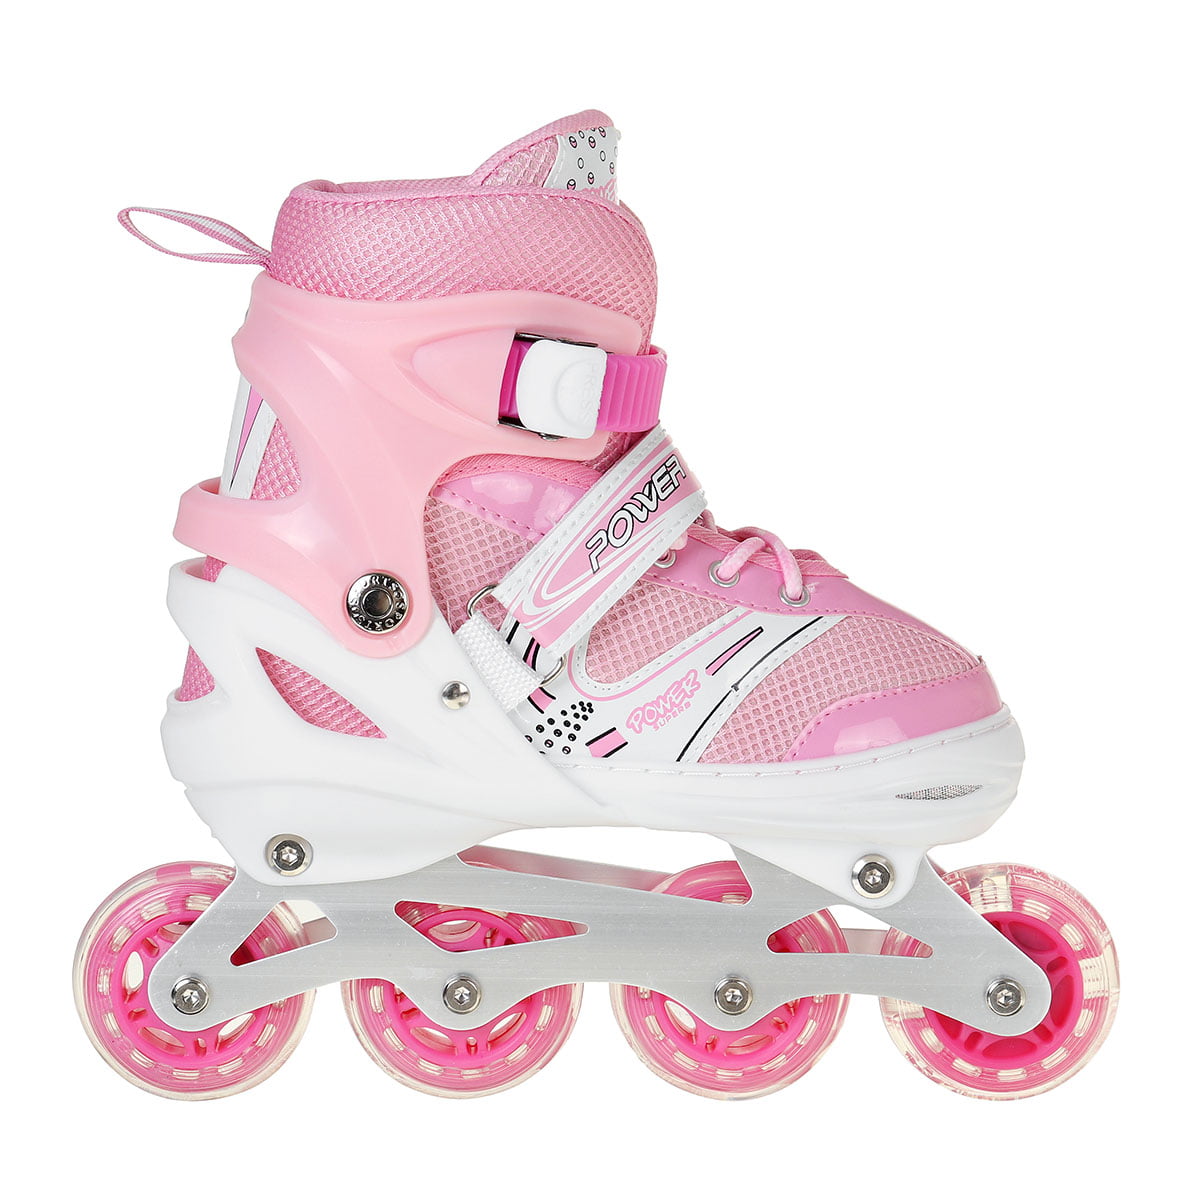 Nyctus Adjustable Kids Inline Skates with Light up Wheels Inline Roller Skates for Beginners Fun Roller Blades for Boys Girls 